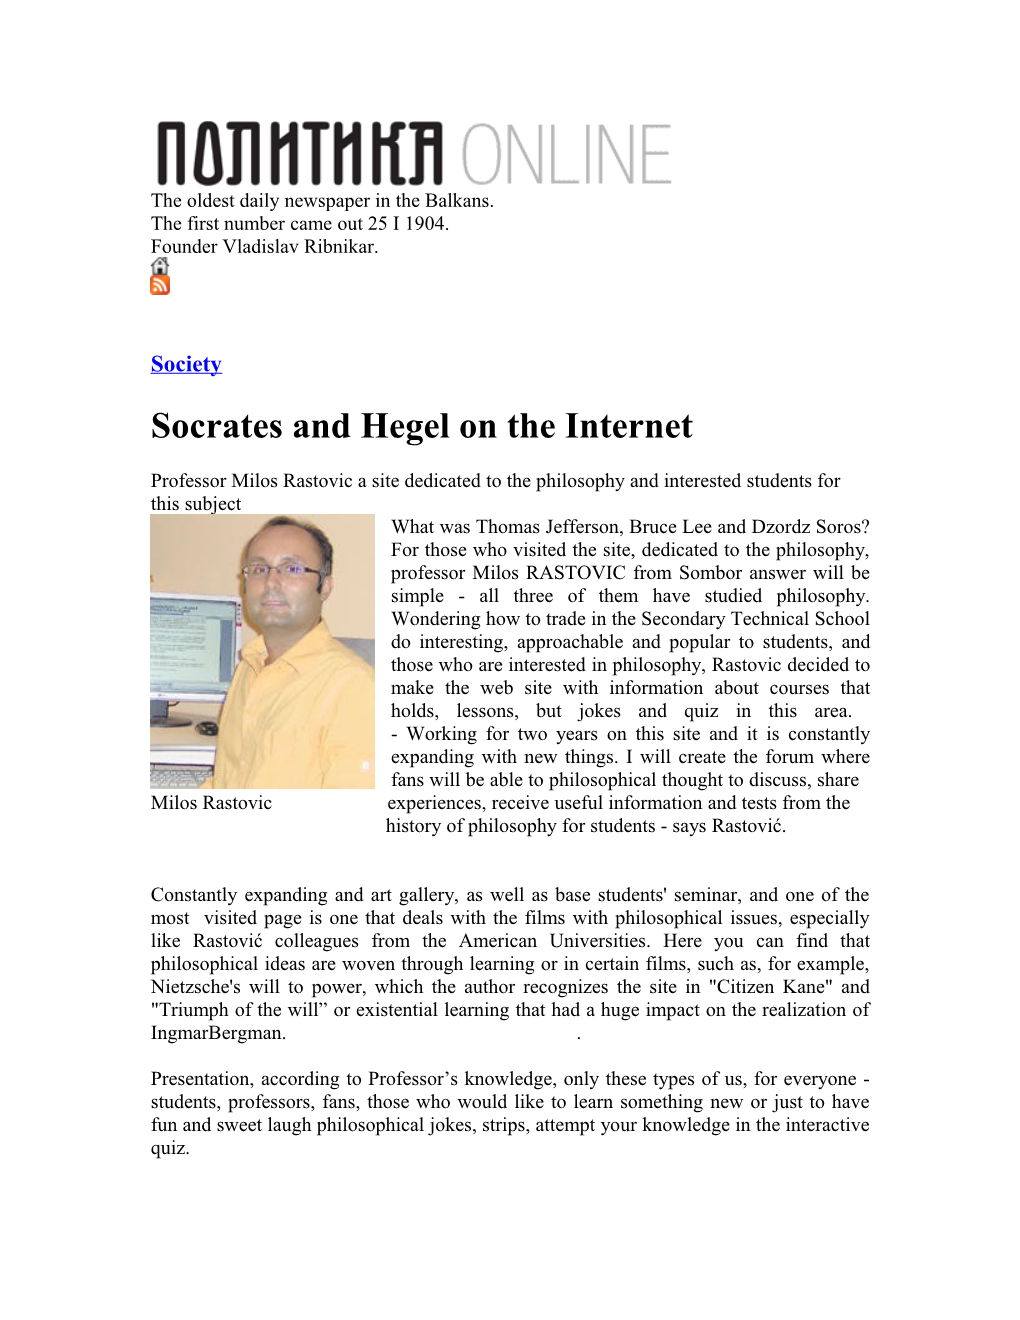 Socrates and Hegel on the Internet